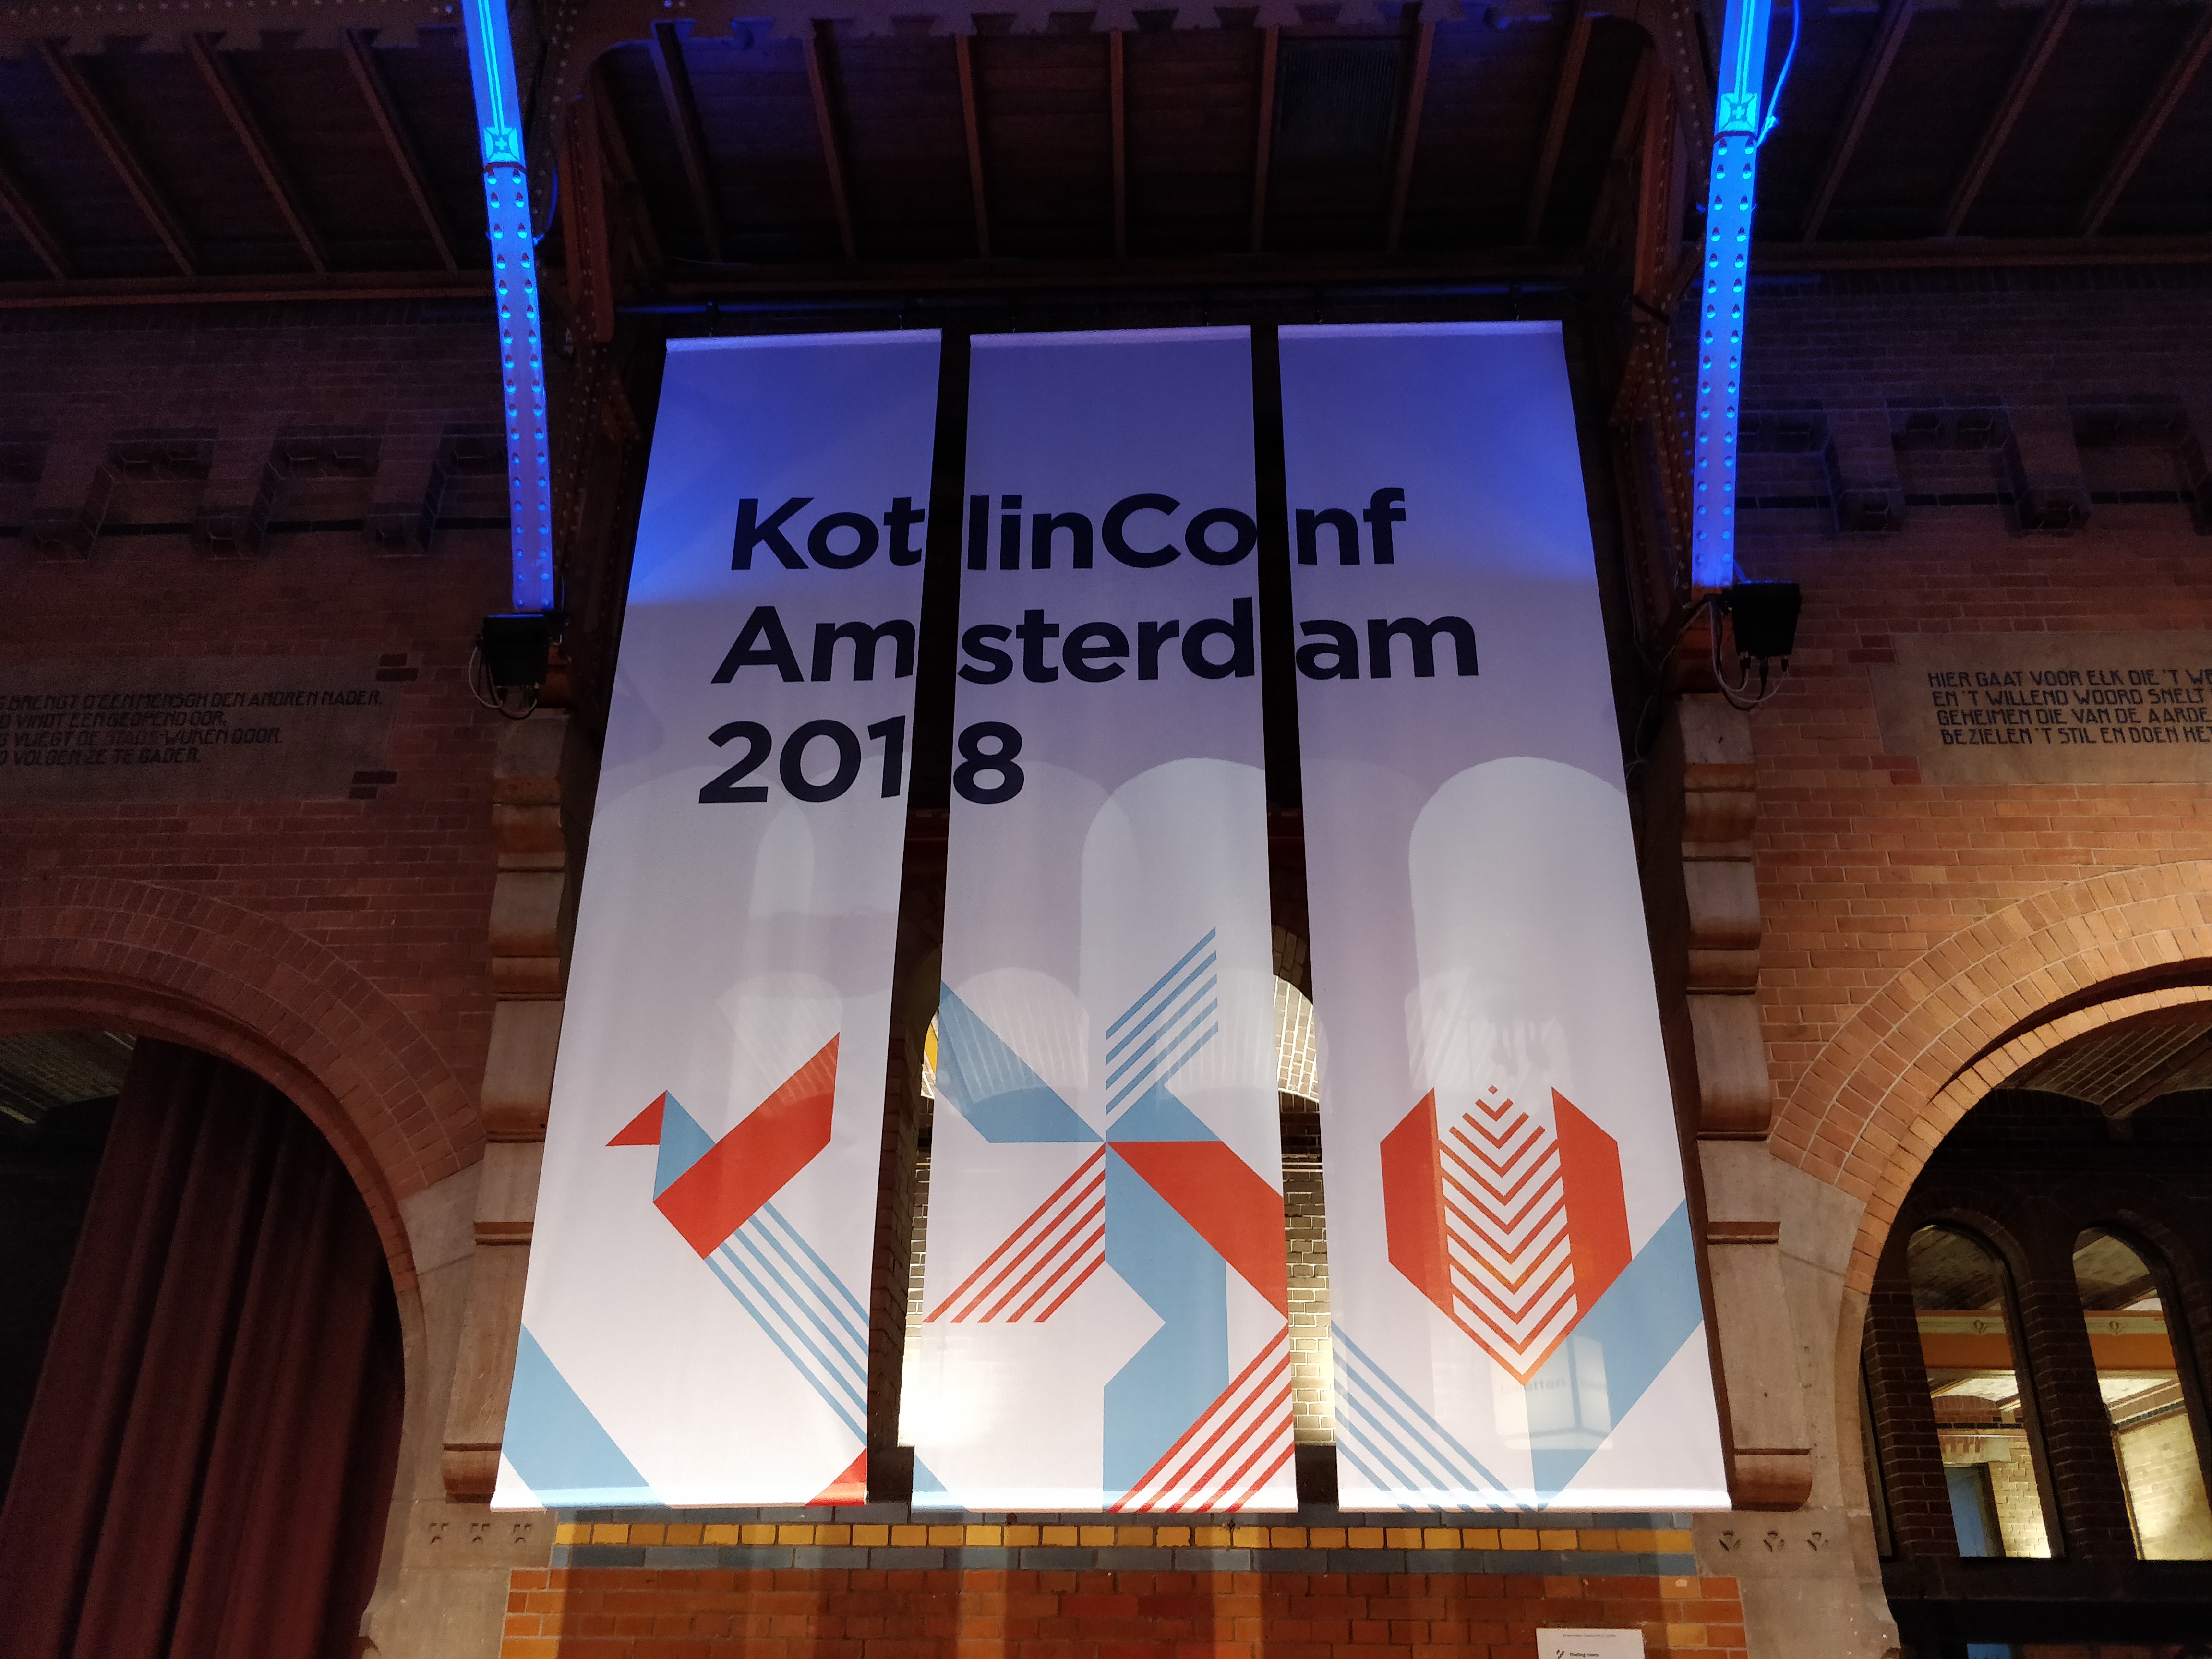 KotlinConf banners in the hall